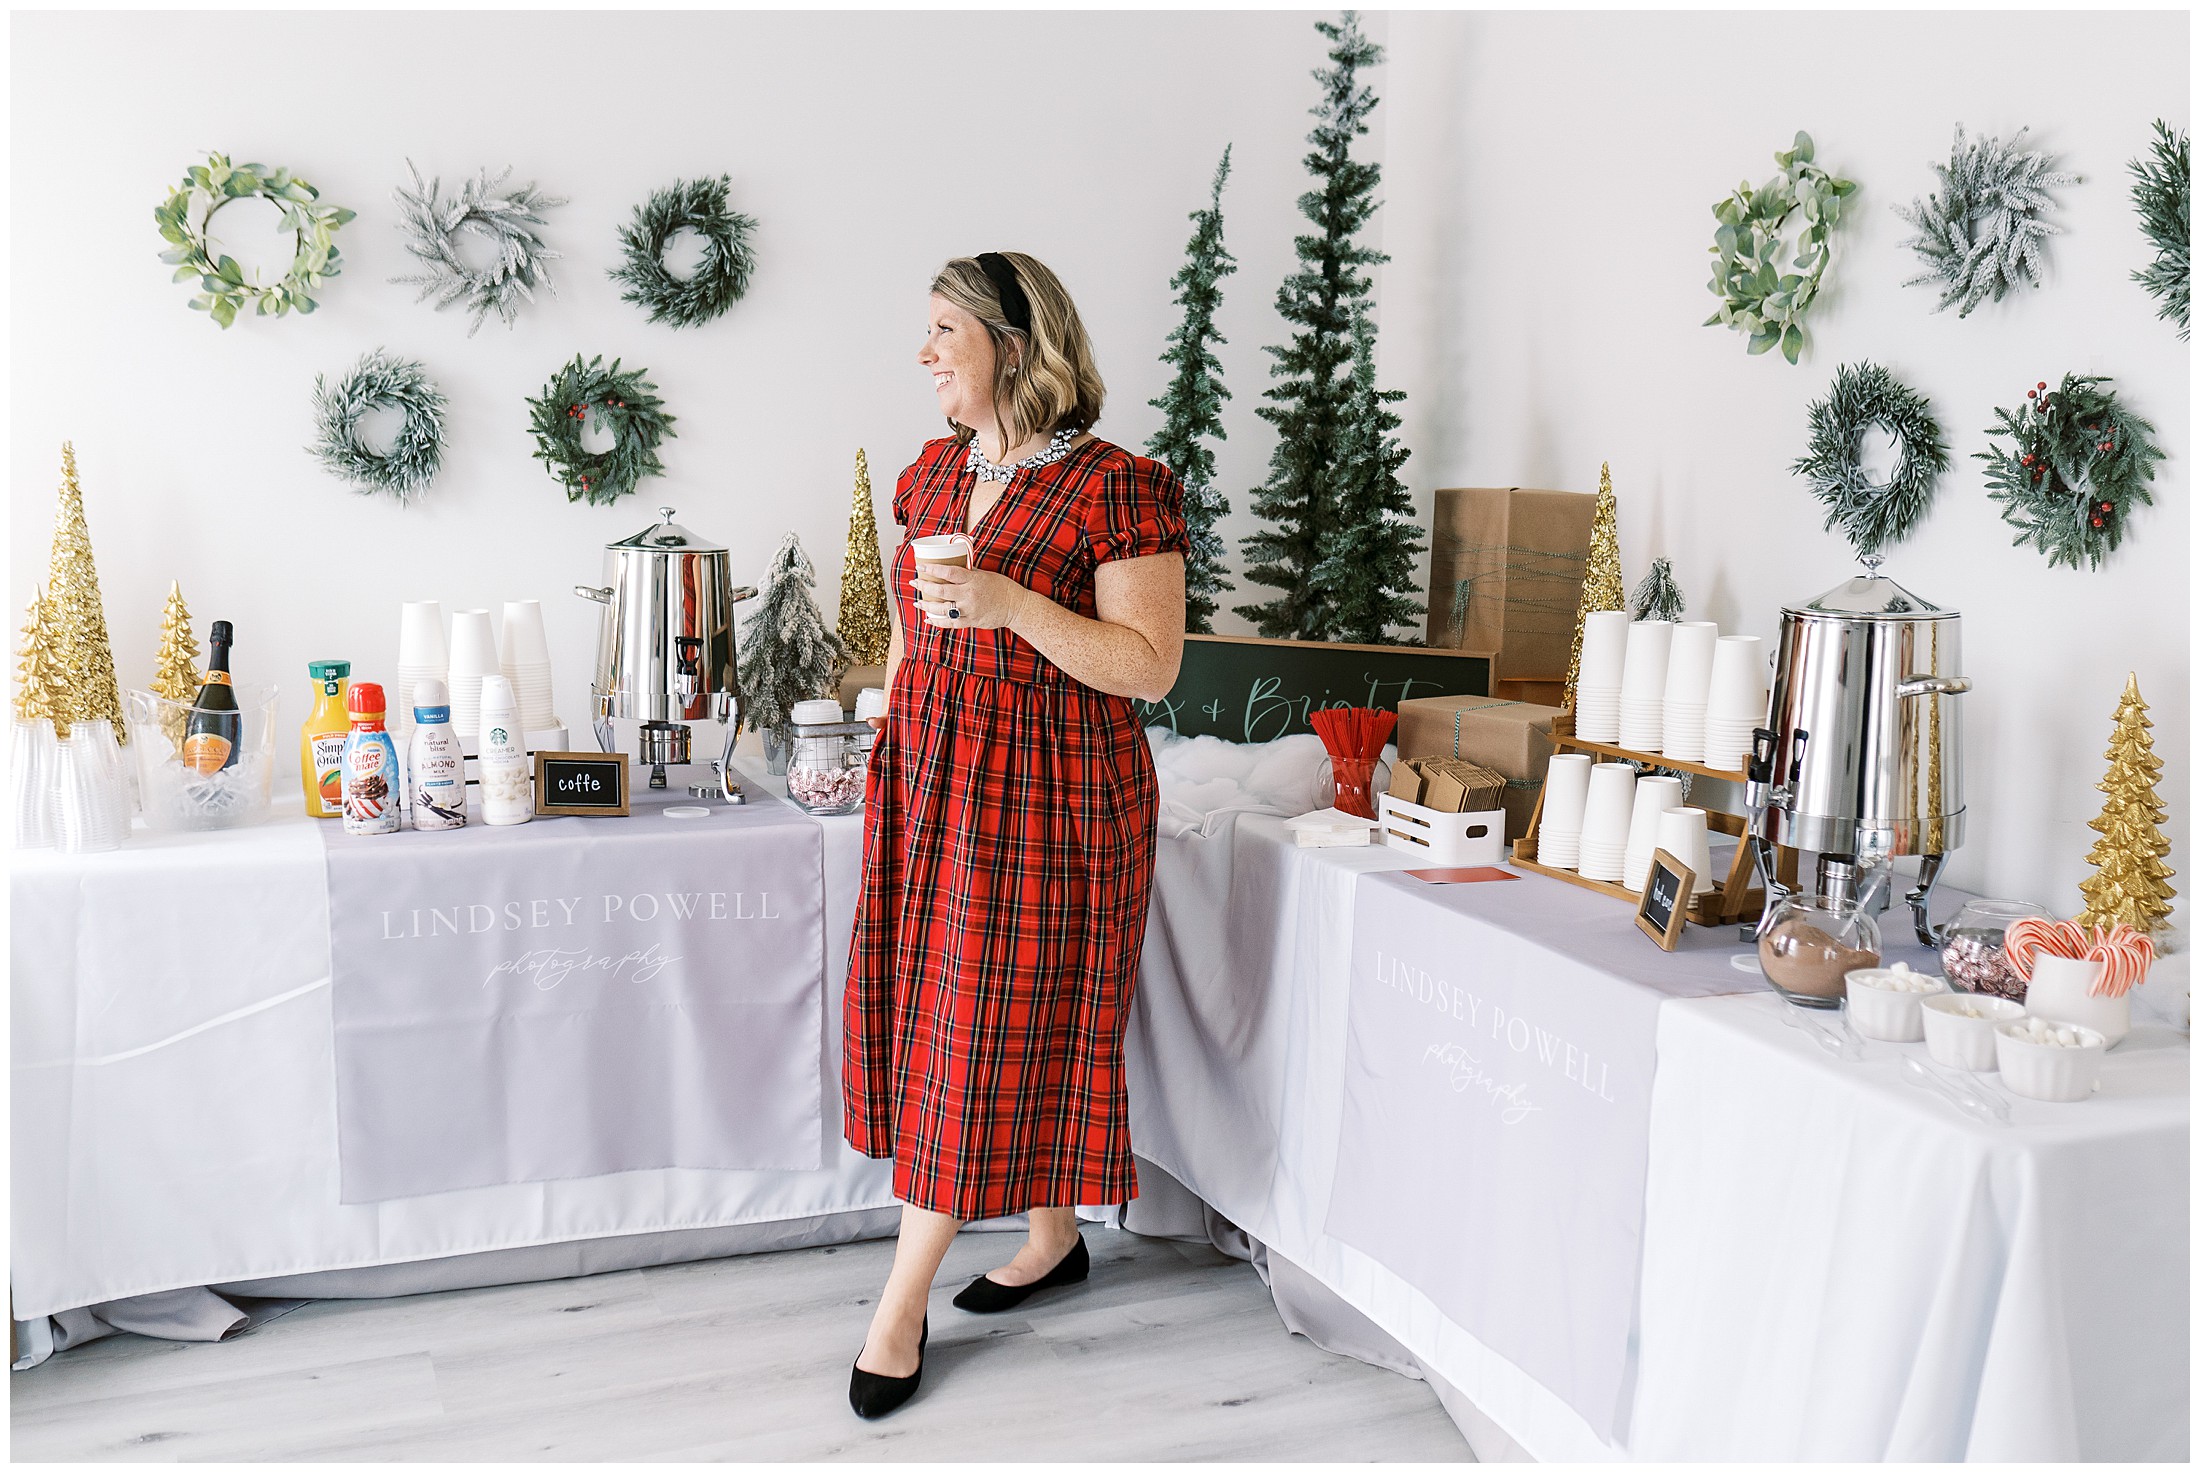 Photographer Lindsey Powell standing in front of a holiday spread during her Marietta Santa Photo Experience.